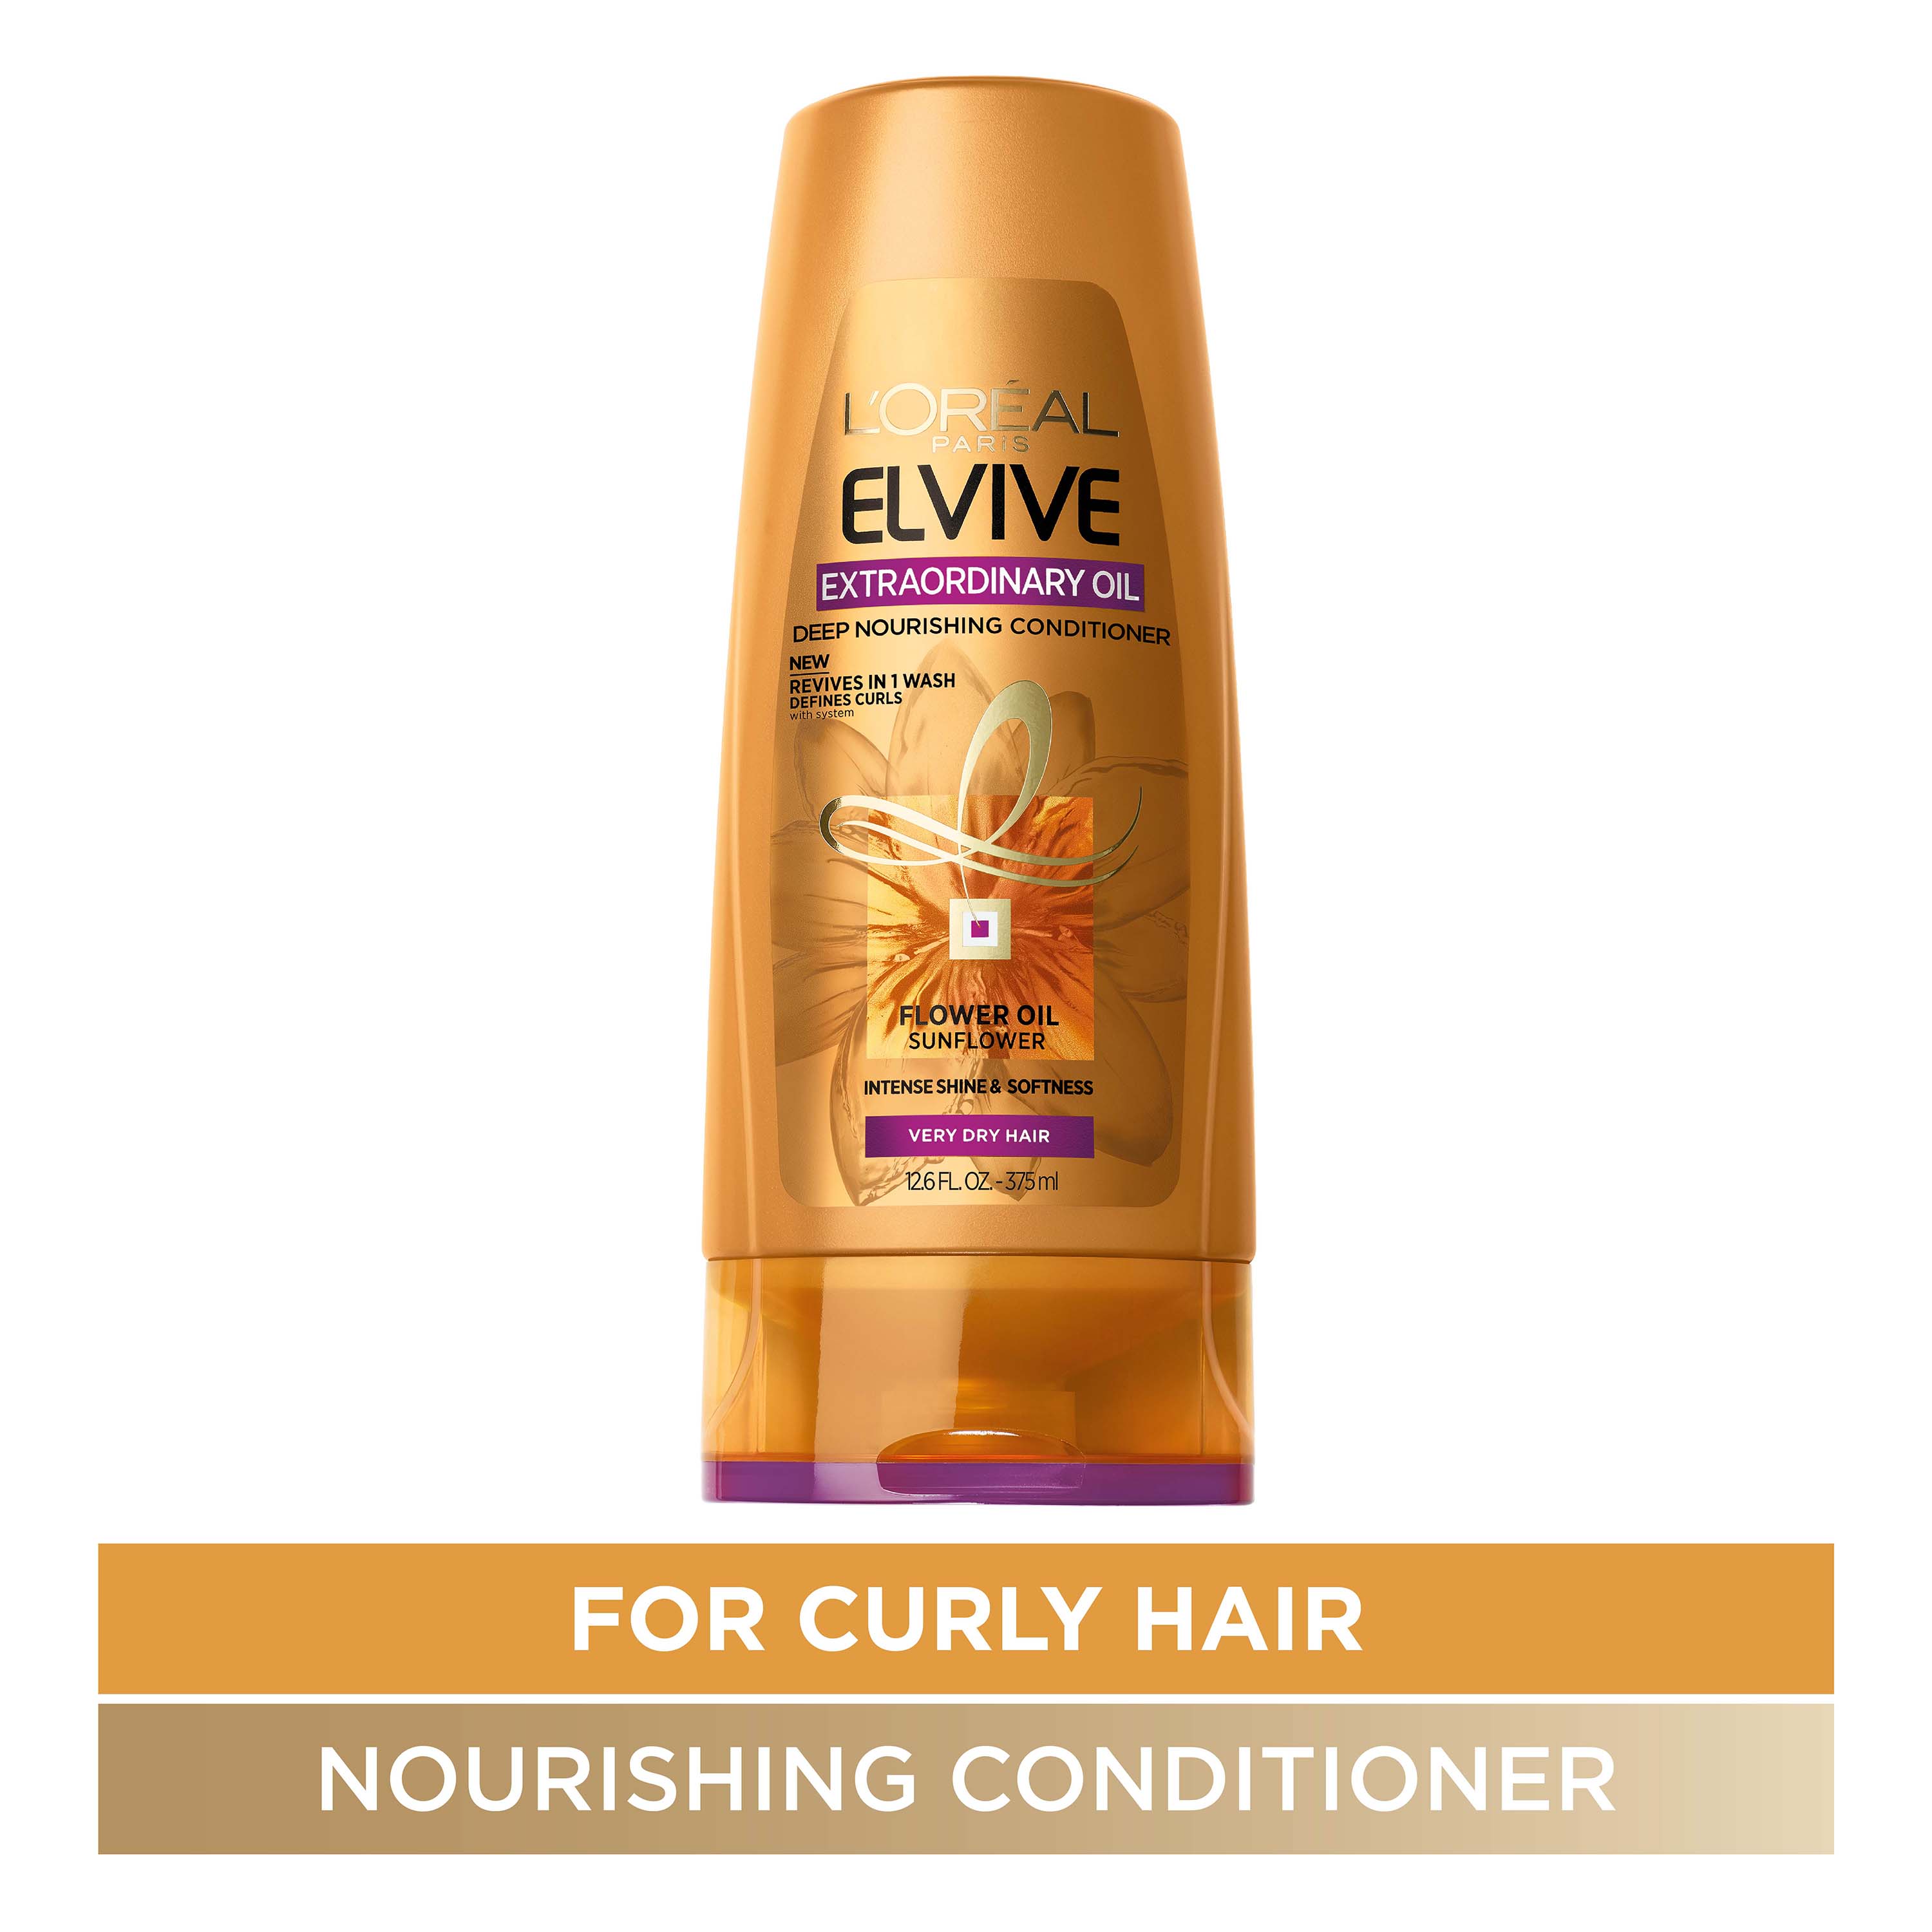 L'Oreal Paris Elvive Extraordinary Oil Conditioner for Curly Hair, 12.6 oz - image 3 of 6